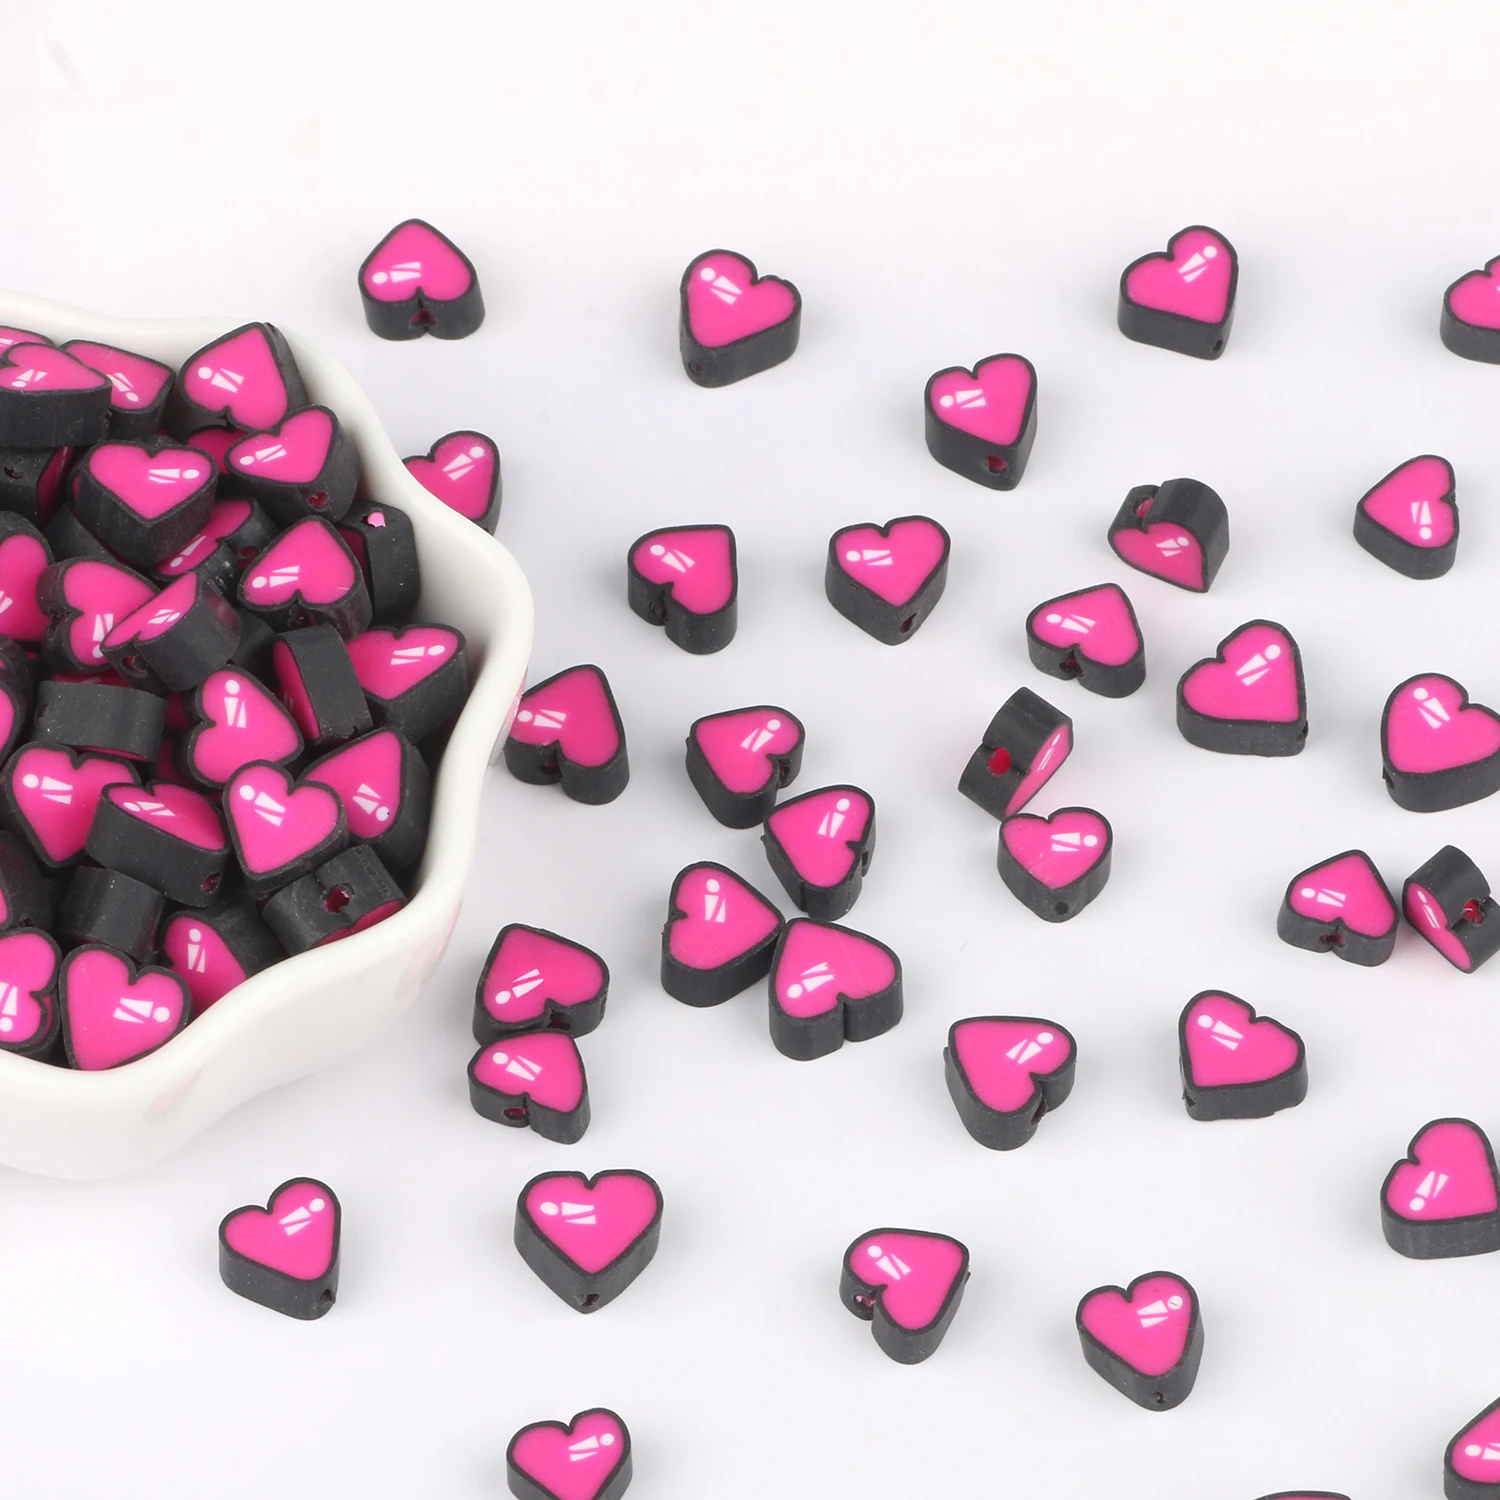 50/100pc 10mm Black Pink Heart Shape Polymer Clay Beads Loose Bead For  Jewelry Making Diy Necklace Bracelet Accessories - Beads - AliExpress